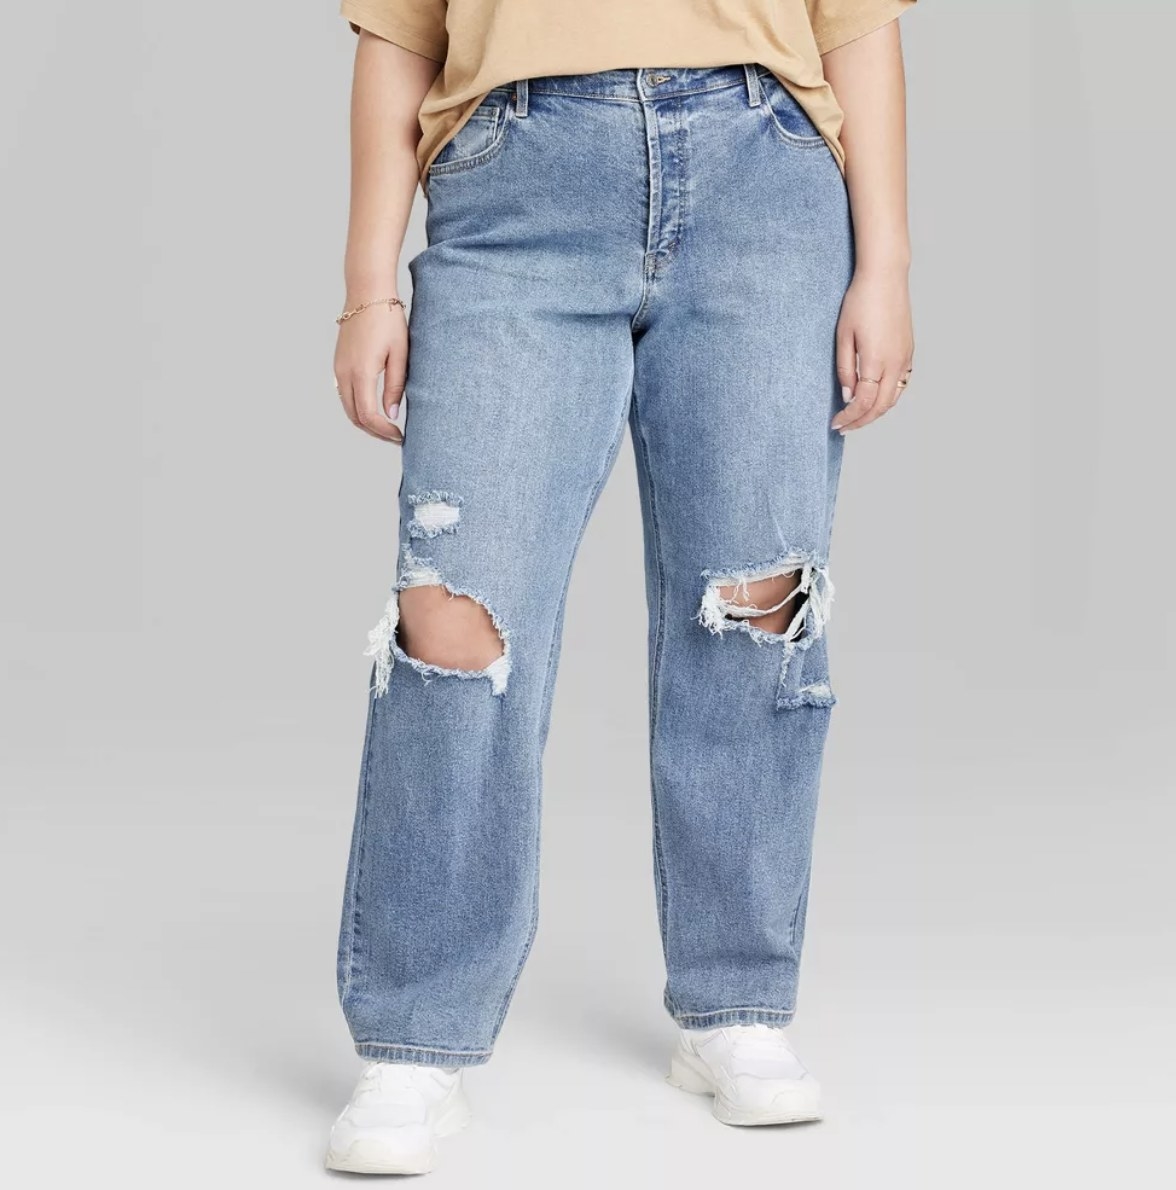 A pair of distressed jeans